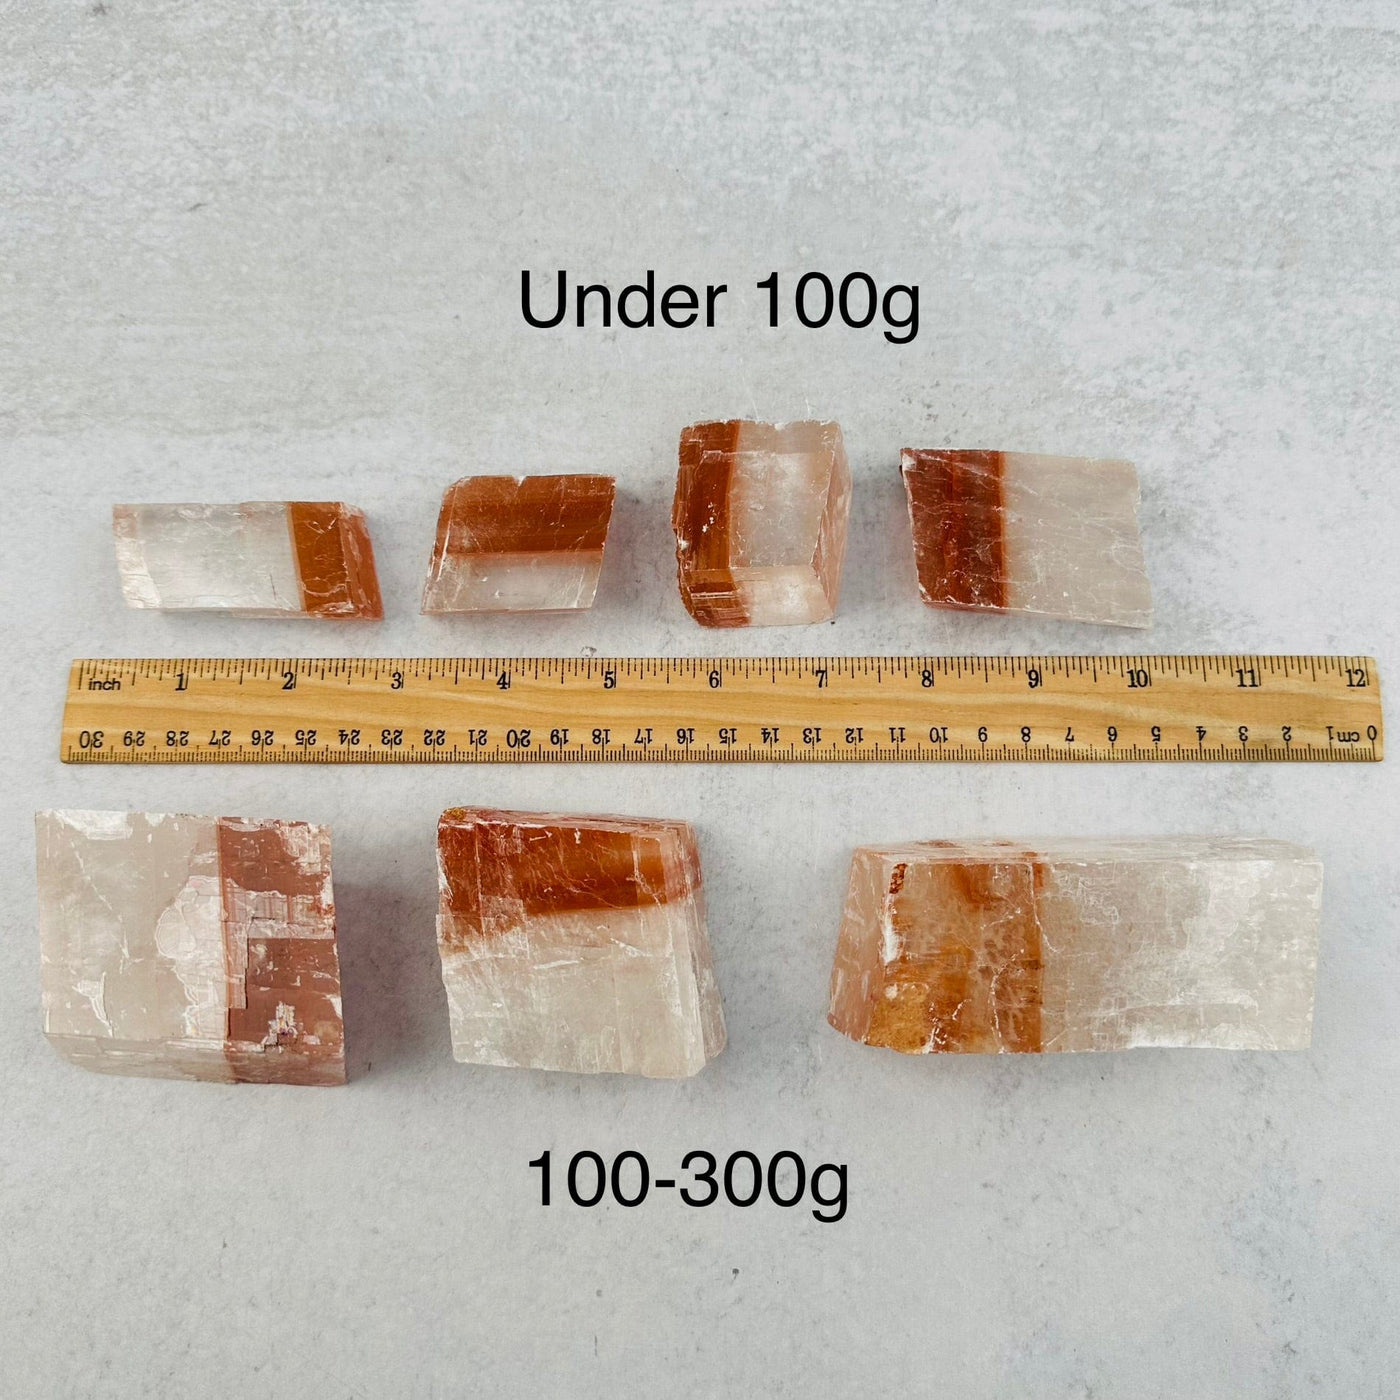 Optical Calcite - White/Red - You Choose Size next to a ruler for size reference 